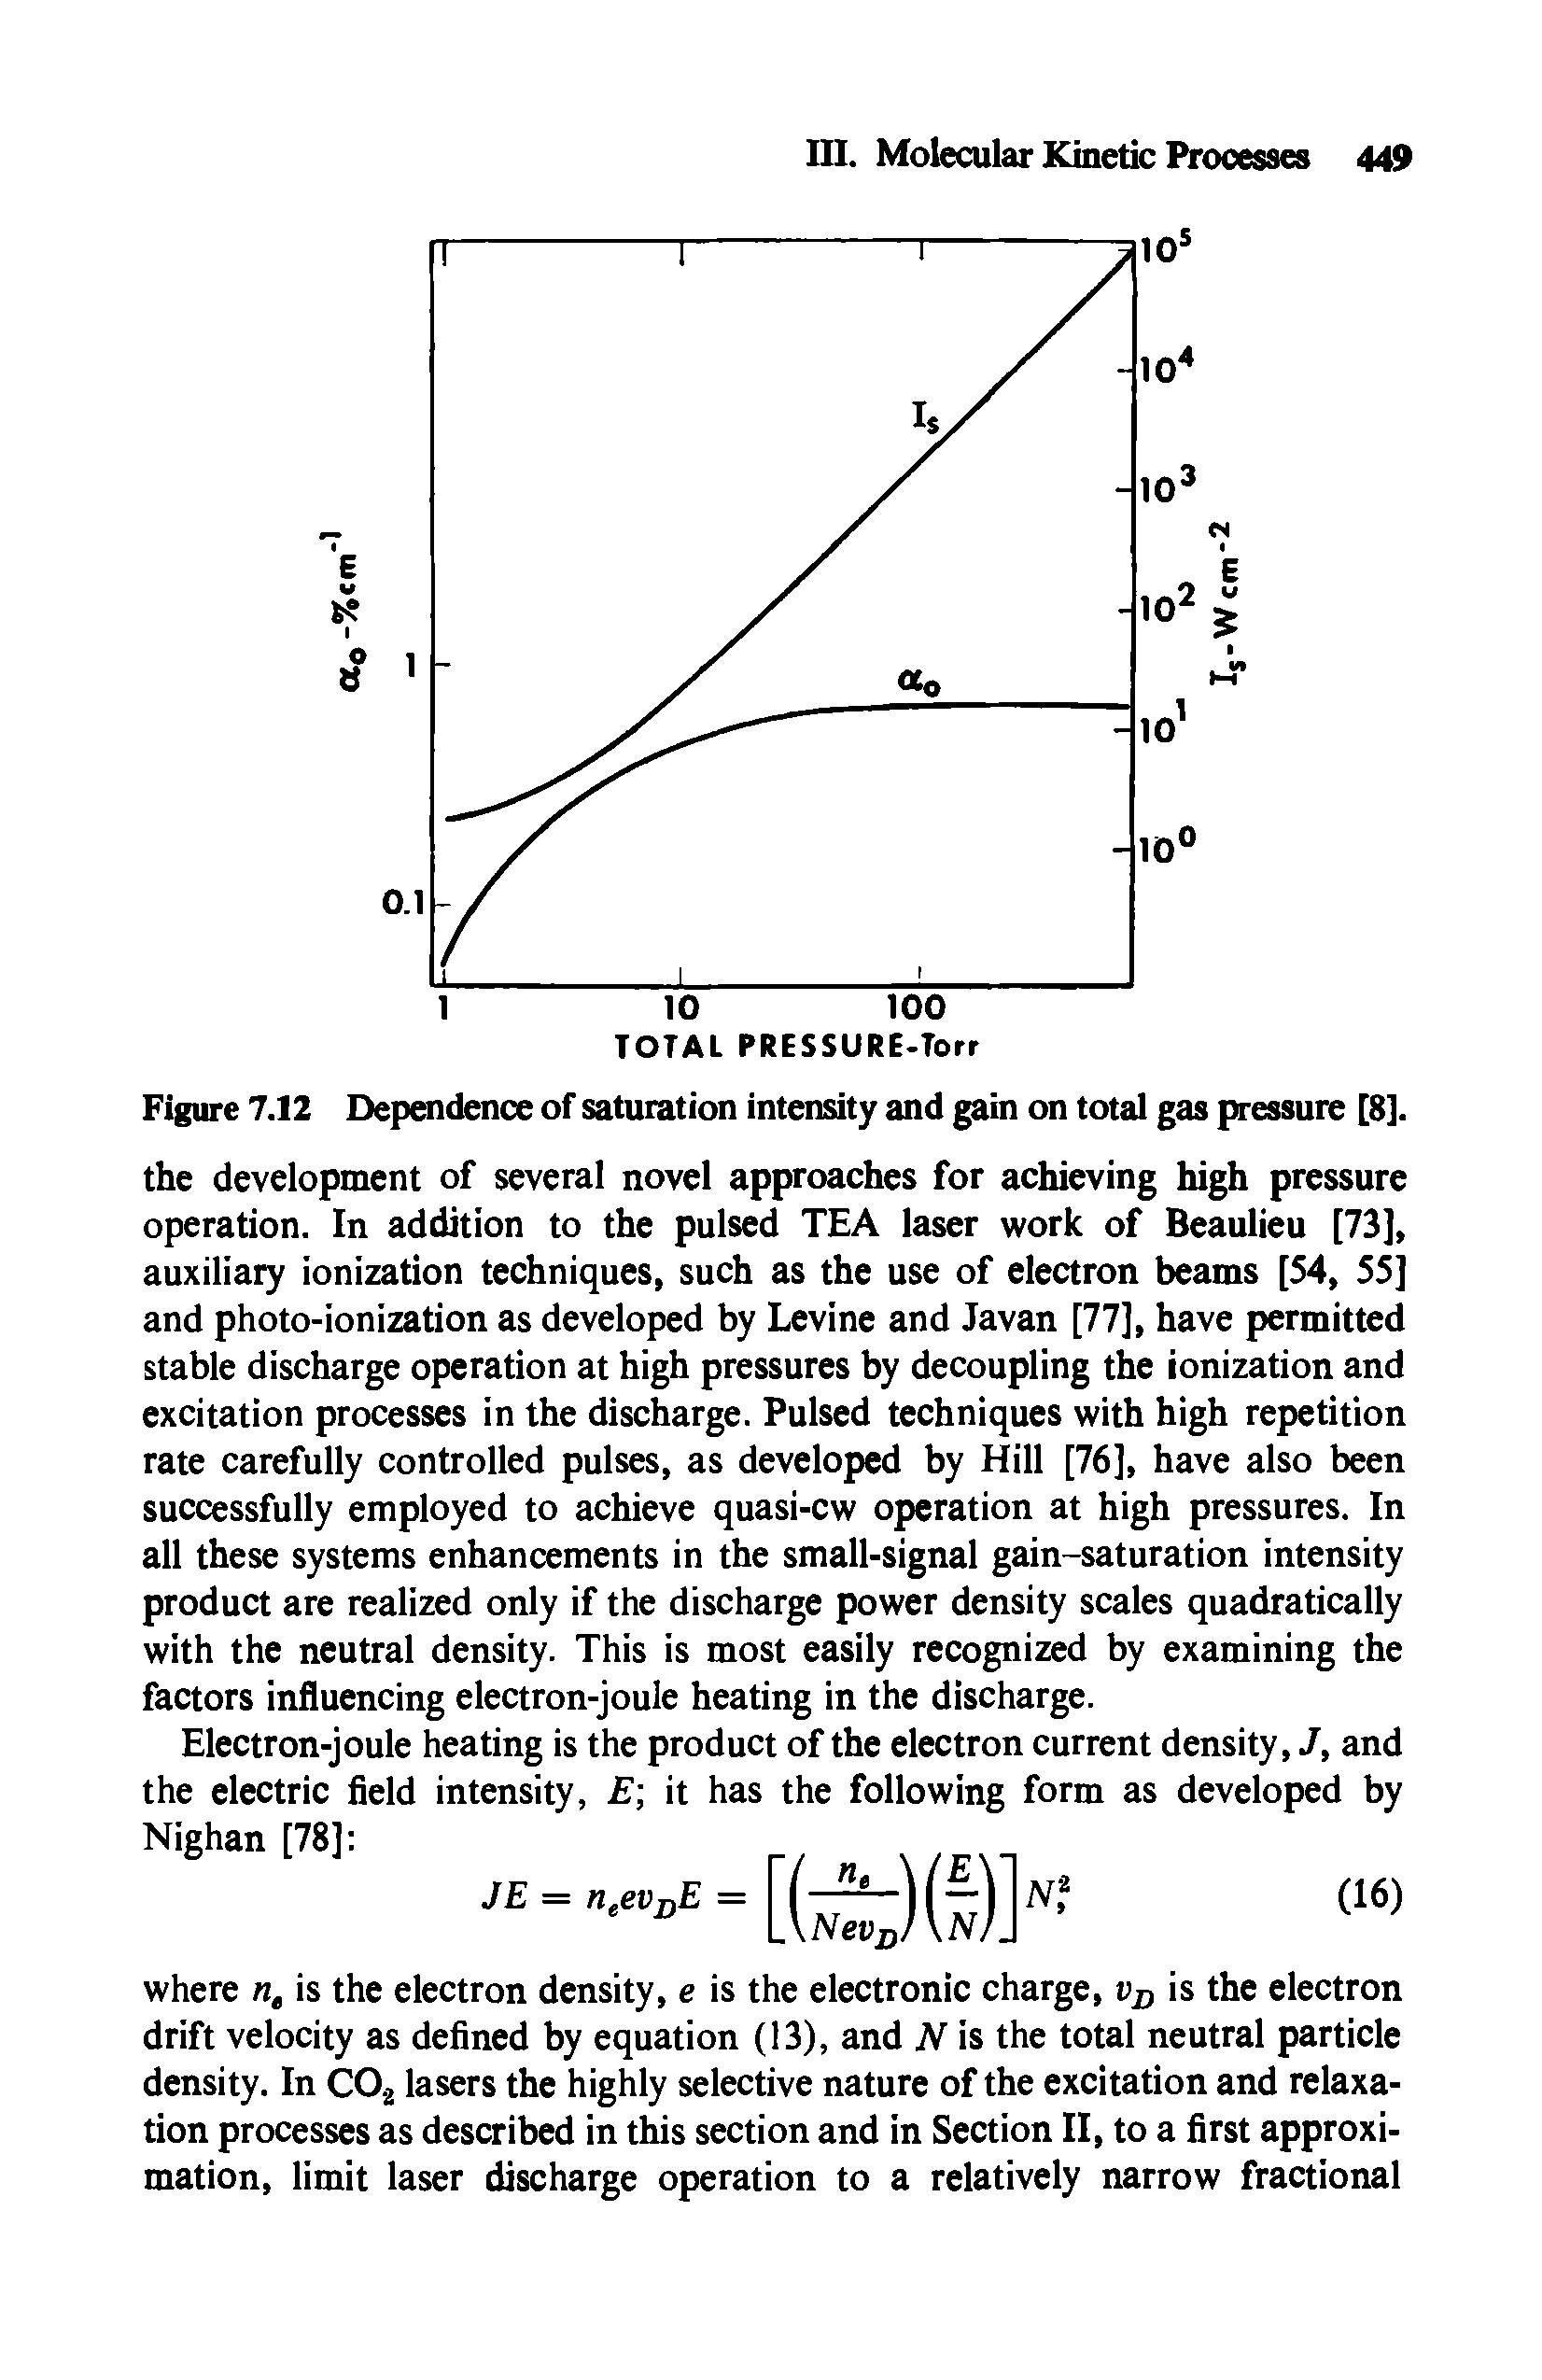 Figure 7.12 Dependence of saturation intensity and gain on total gas pressure [8].